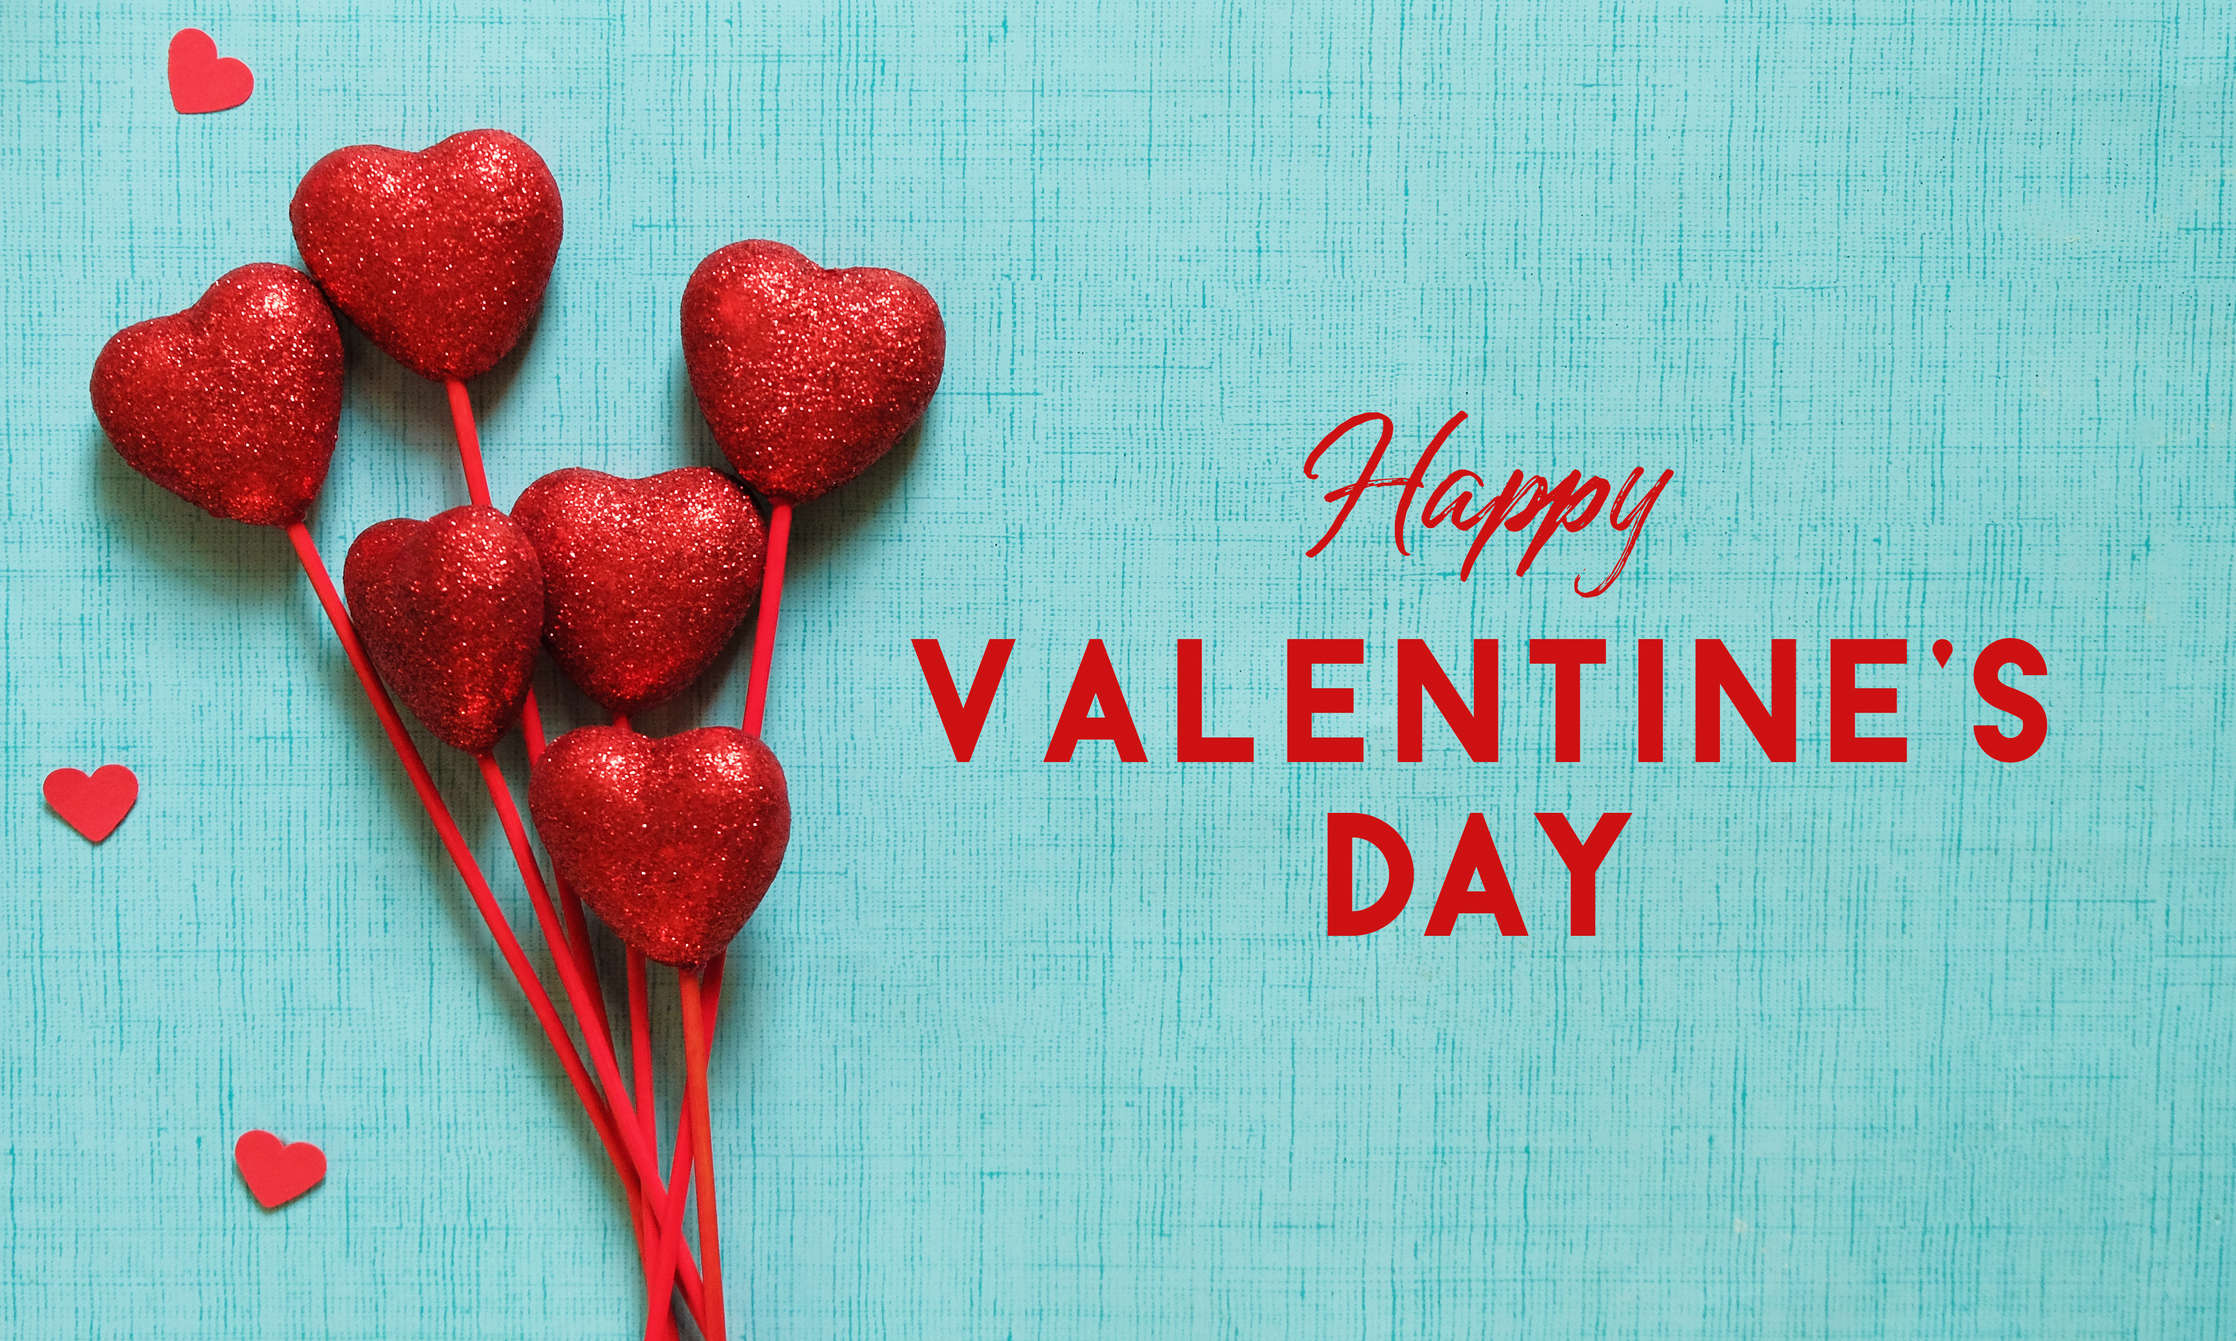 Happy Valentines Day 2020 Images Quotes Wishes Messages Cards